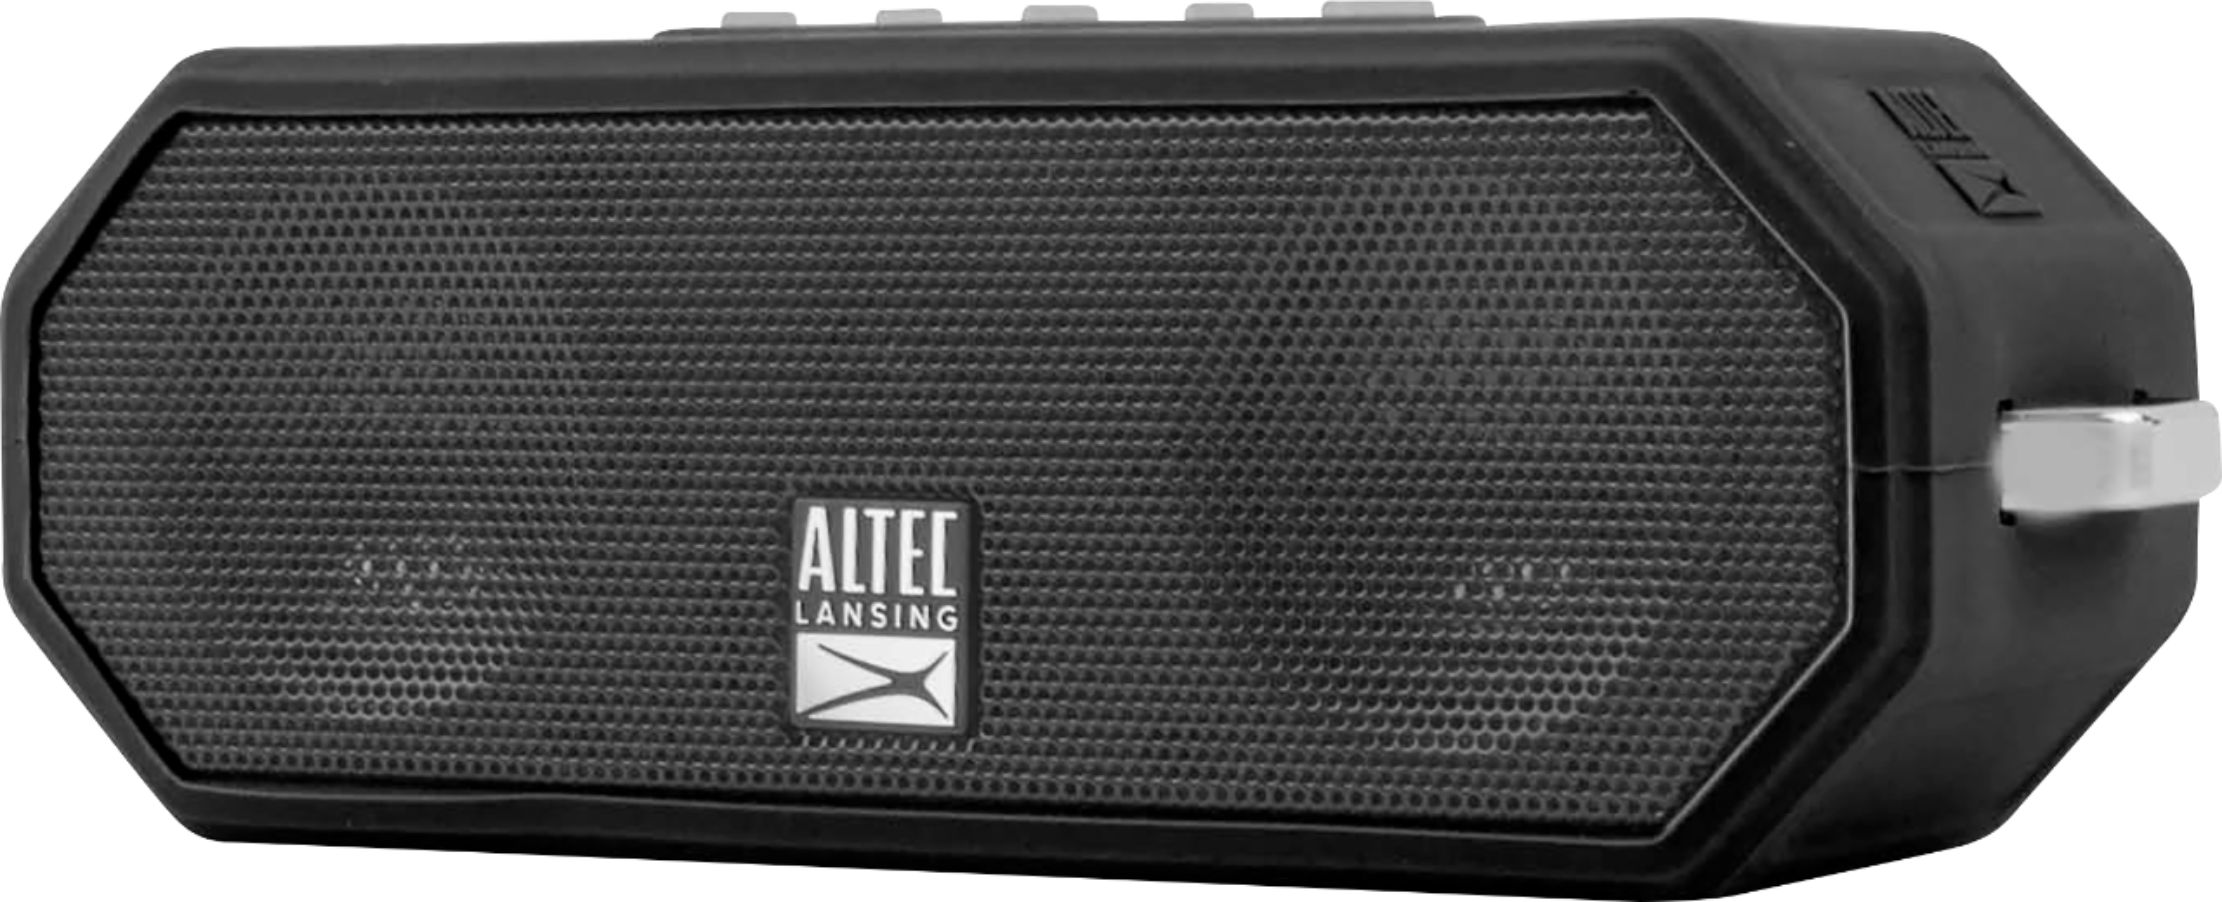 Can You Pair Two Altec Lansing Speakers 